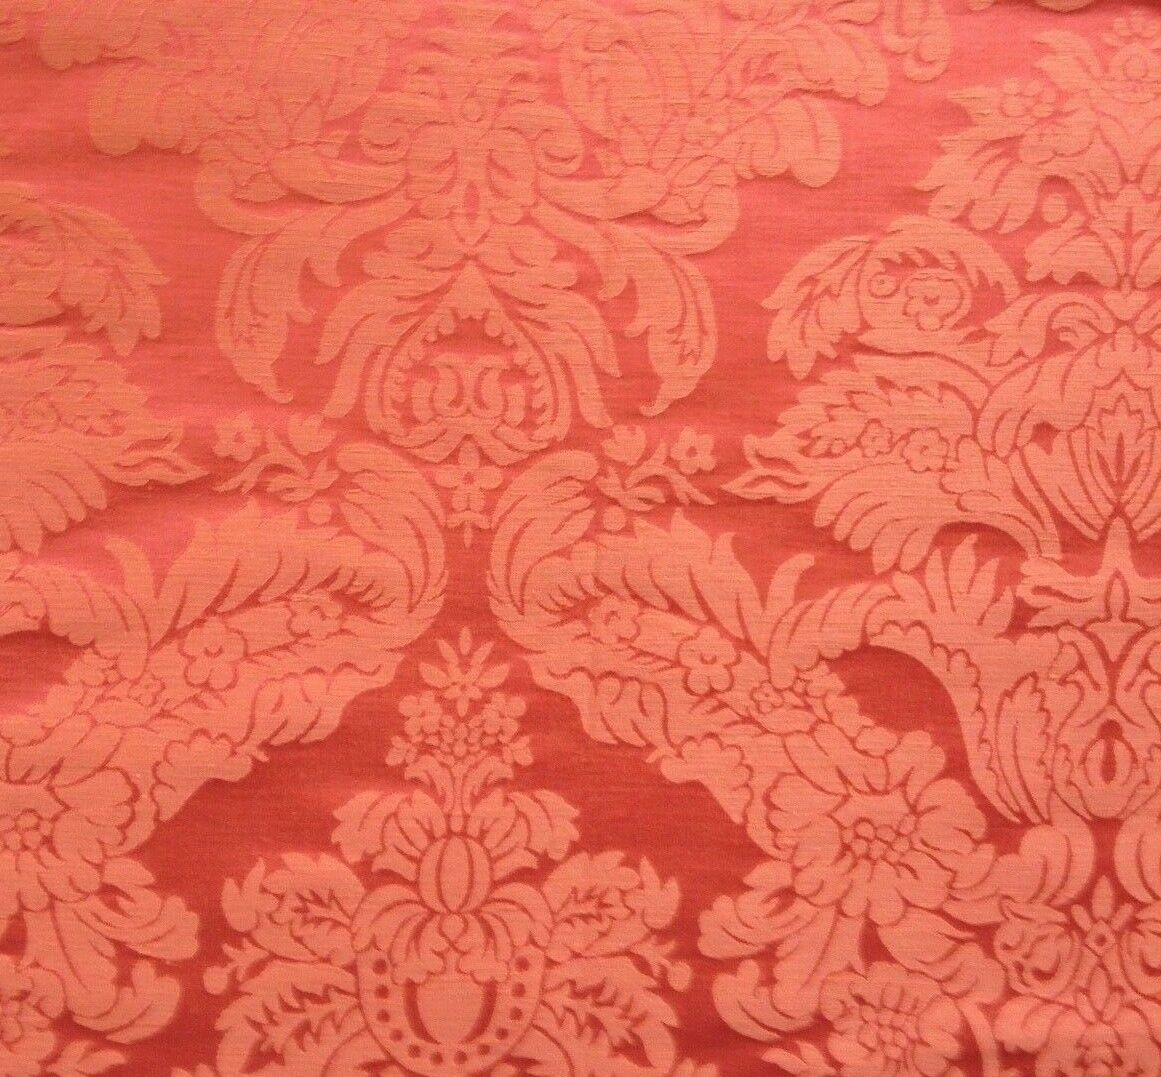 CLARENCE HOUSE Hill Brown Bonnevie Coral Damask Remnant New